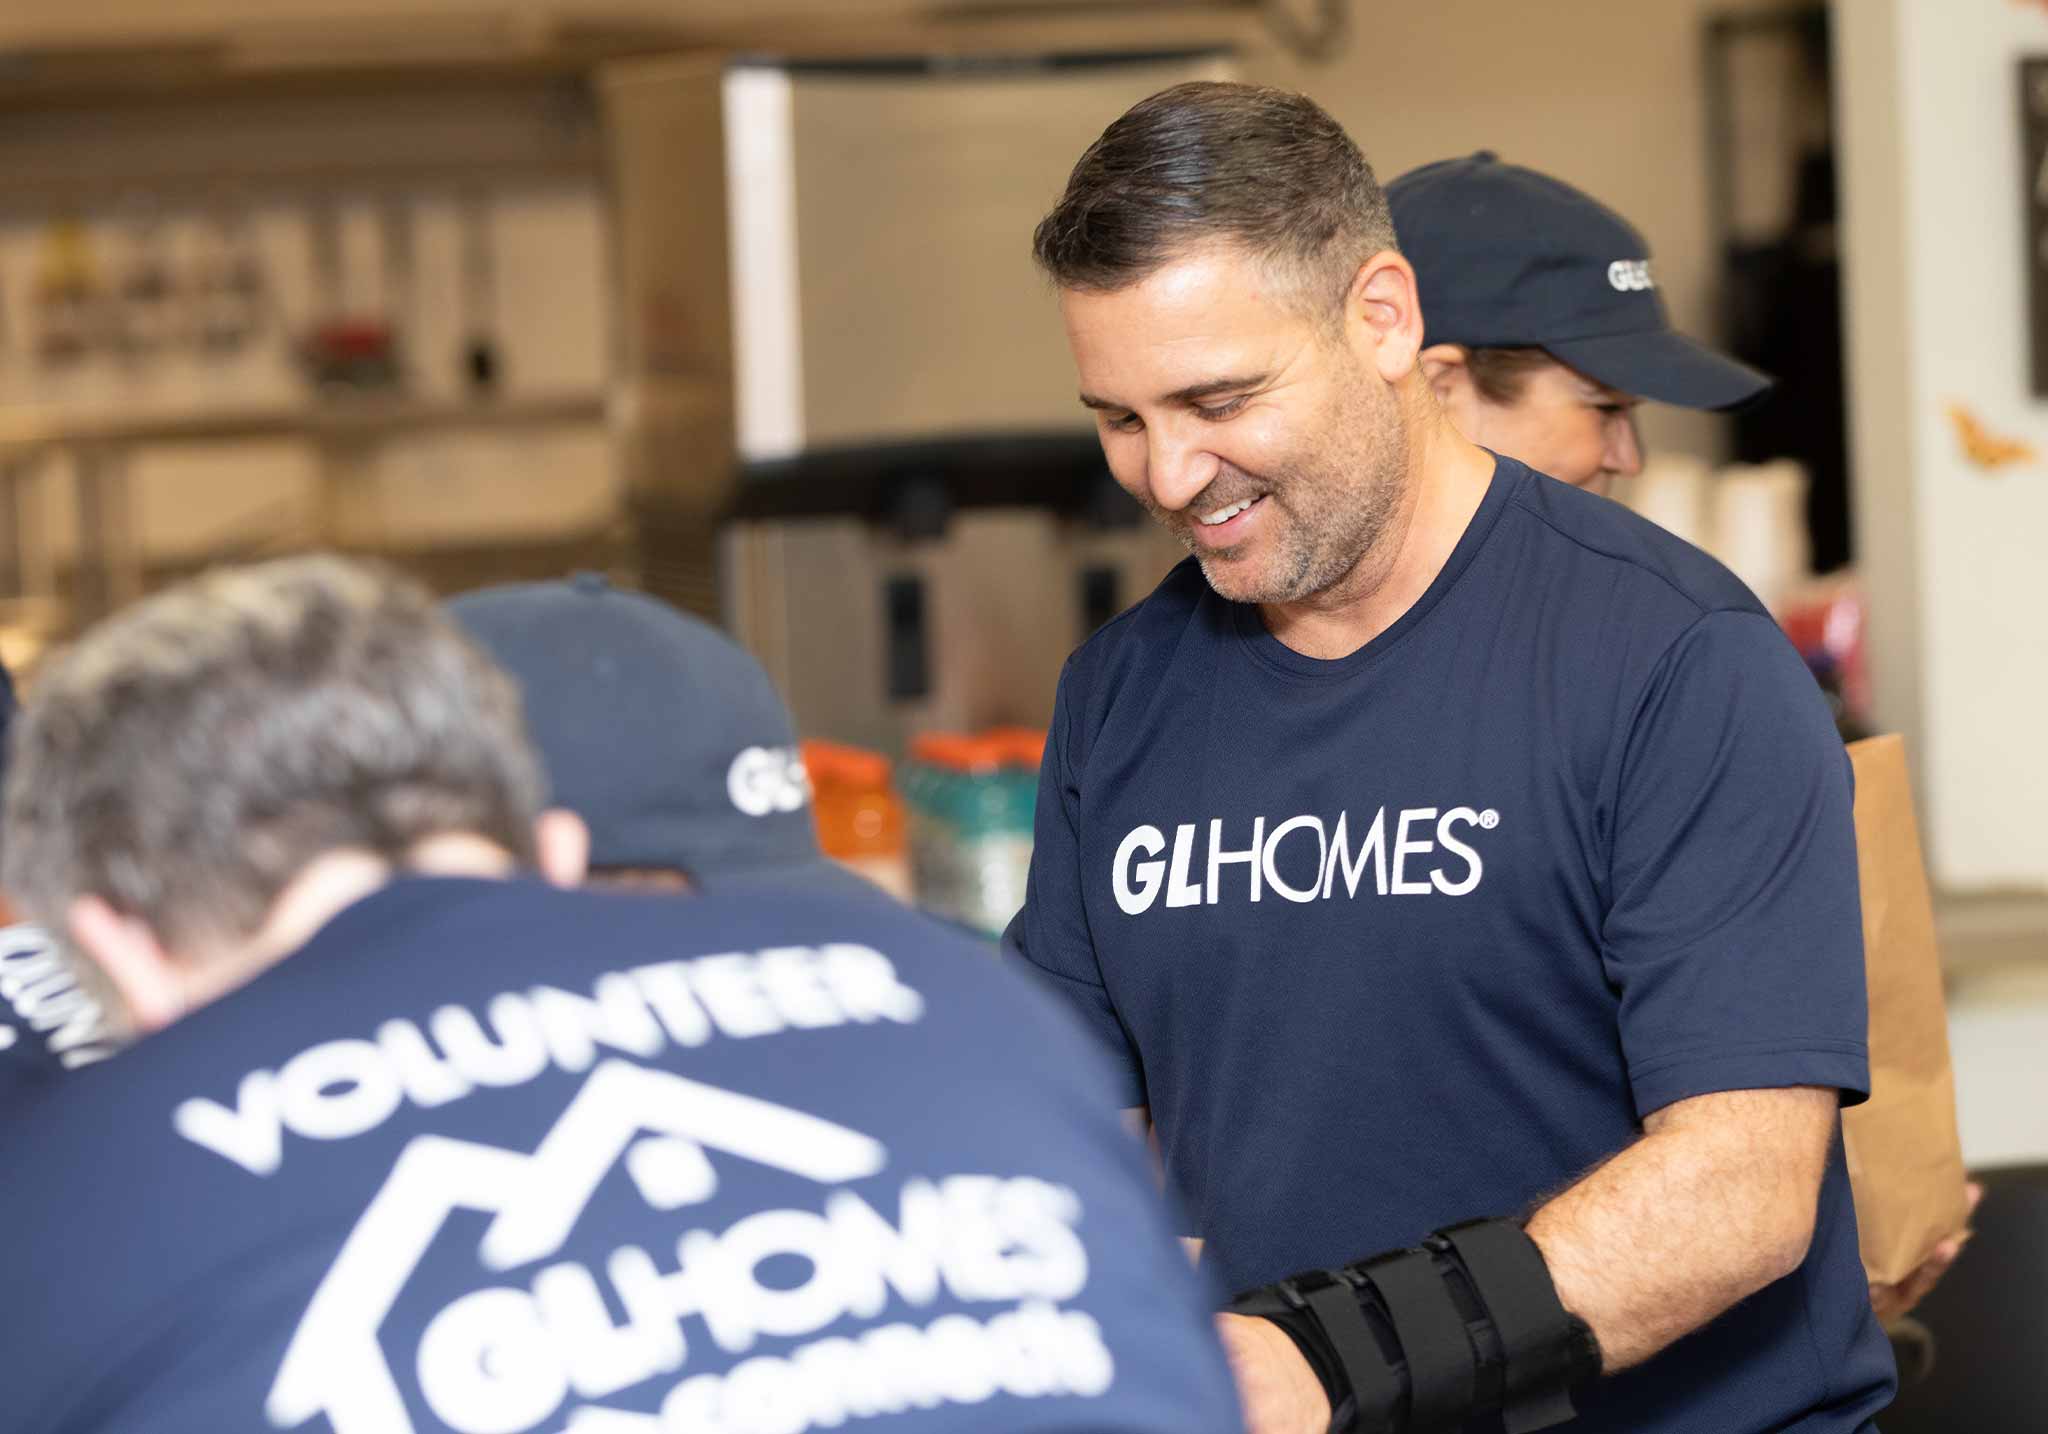 GL Homes supports local charities in Florida.